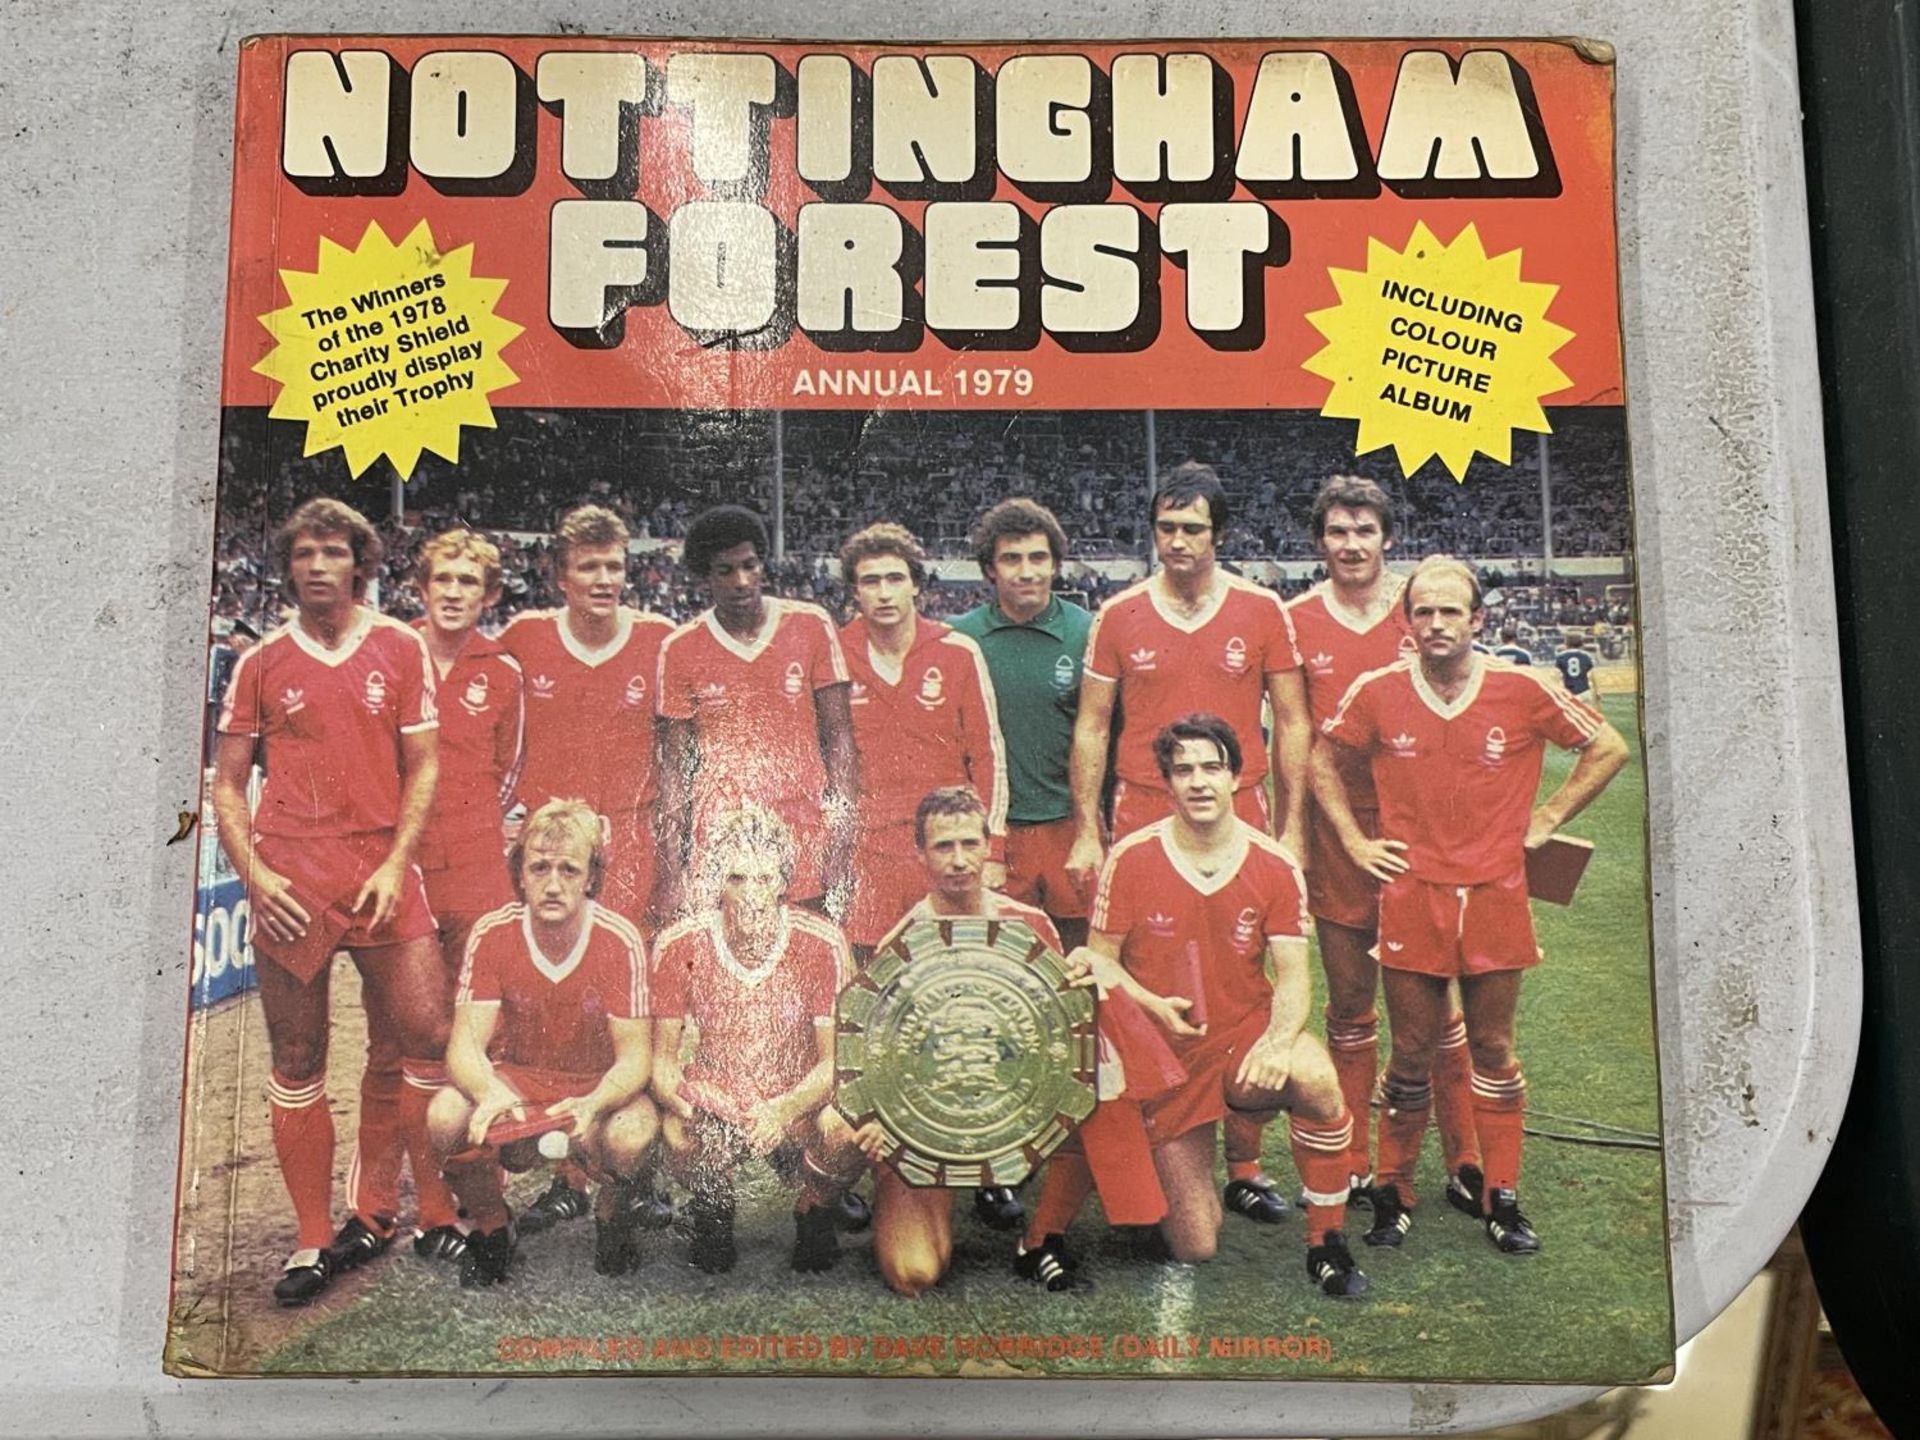 A NOTTINGHAM FOREST 1979 ANNUAL AND AUTOGRAPH SHEET